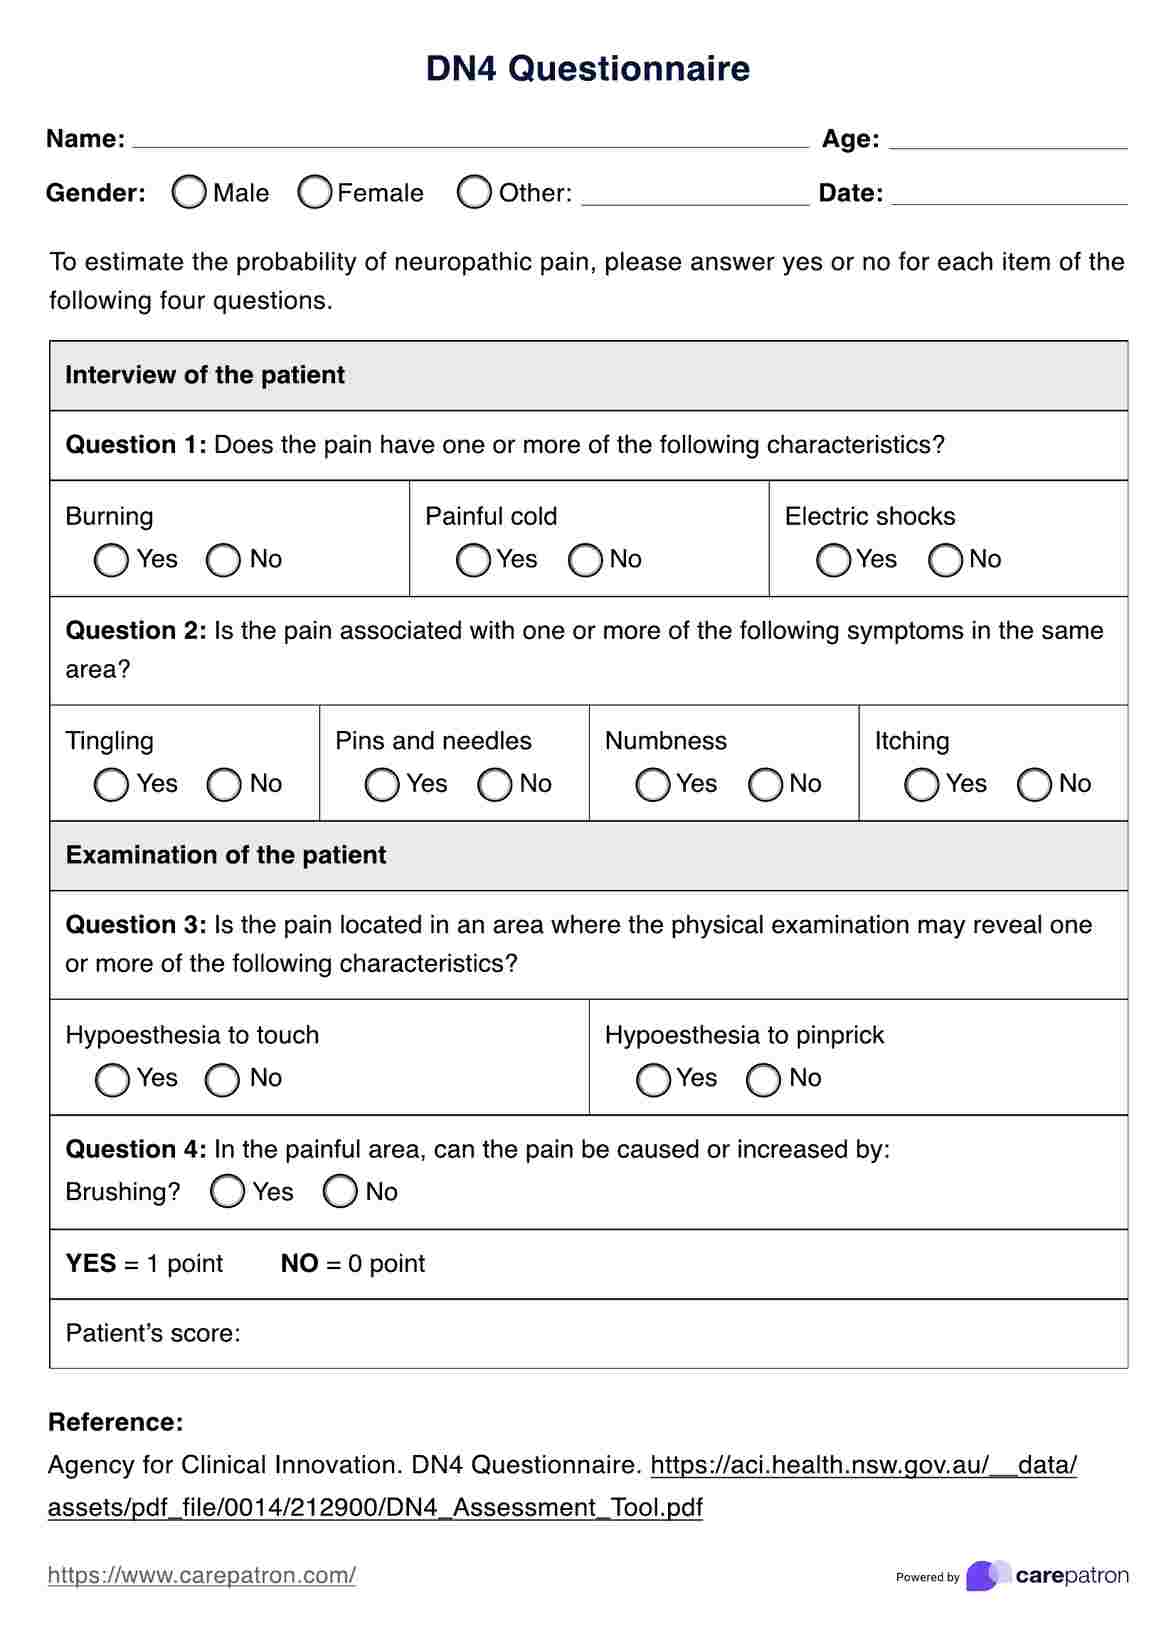 DN4 Questionnaire PDF Example